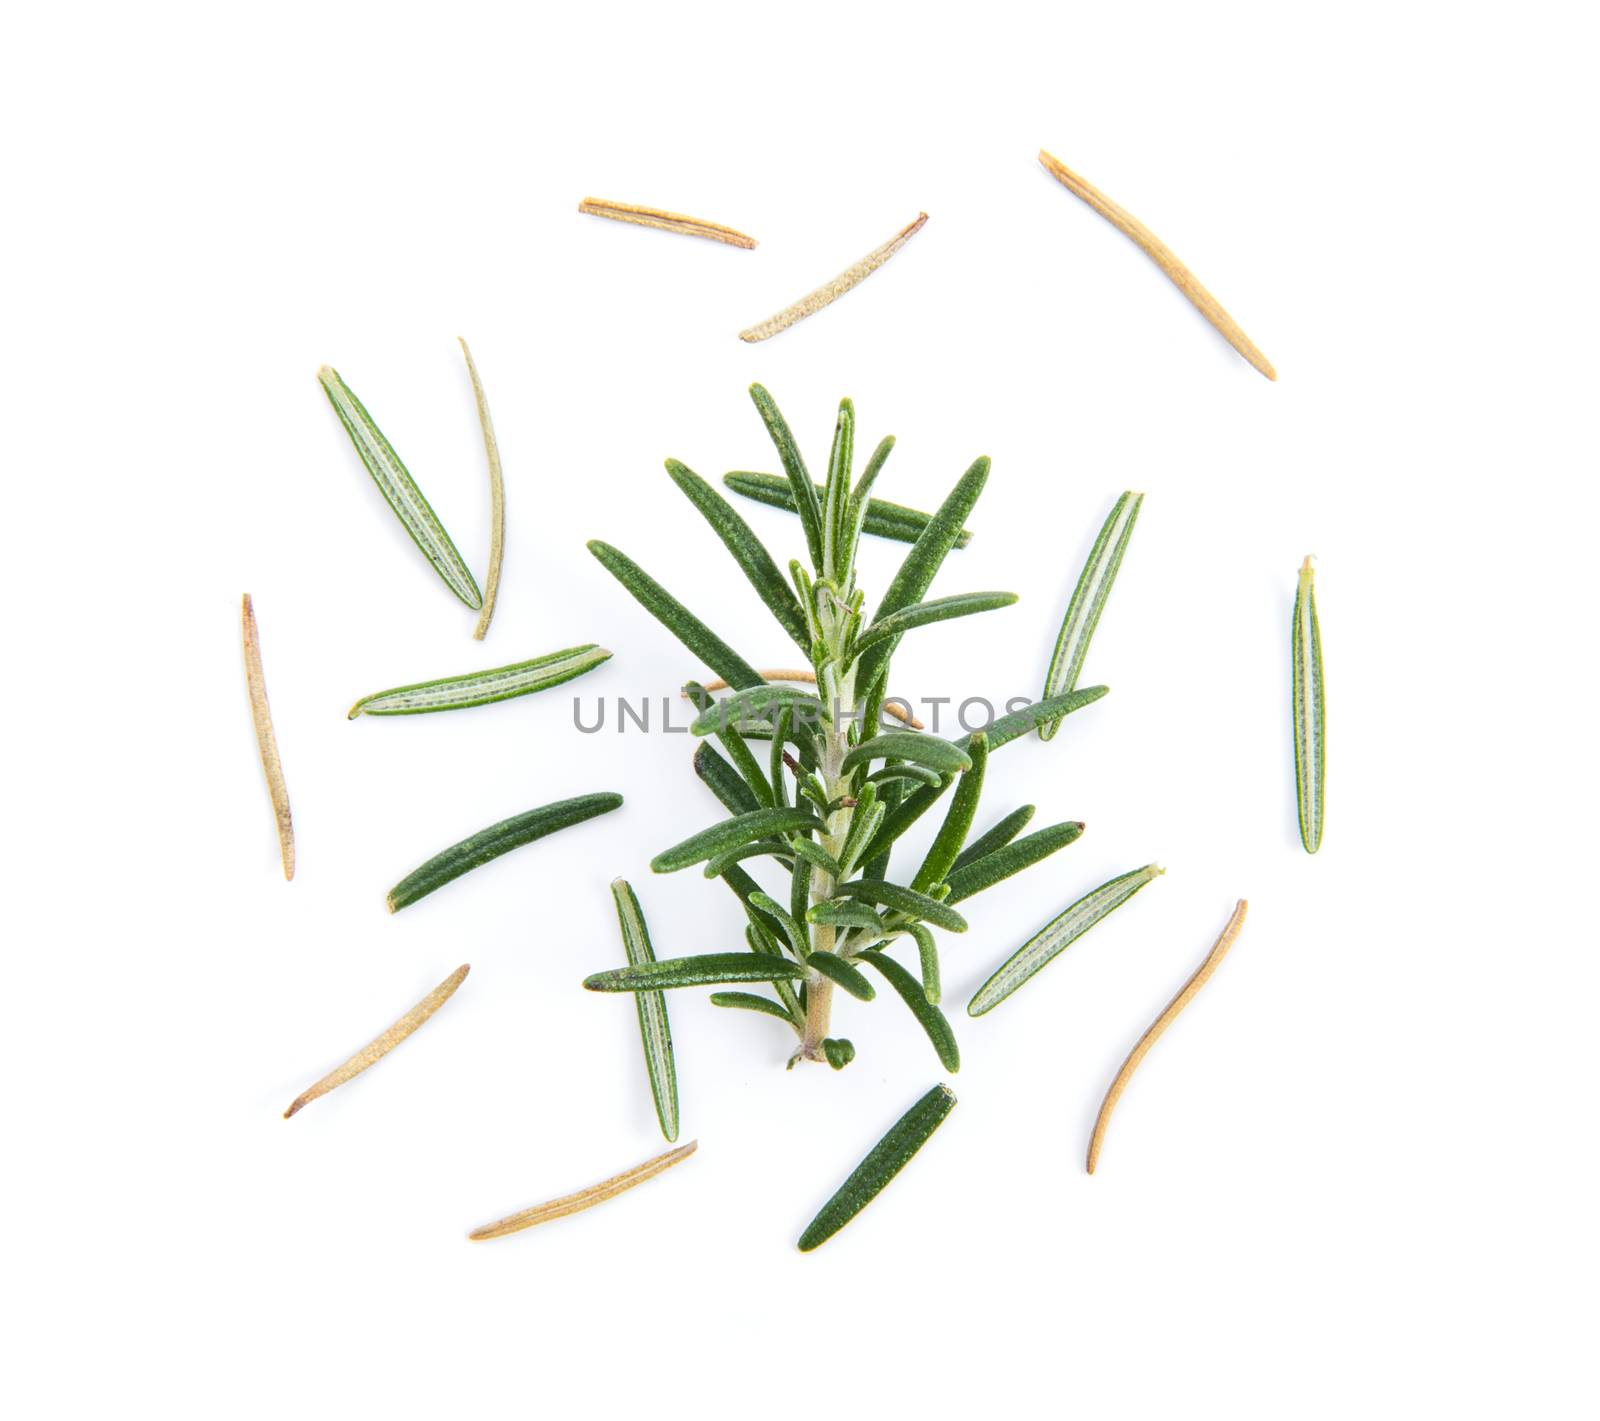 Rosemary isolated on white background by sommai